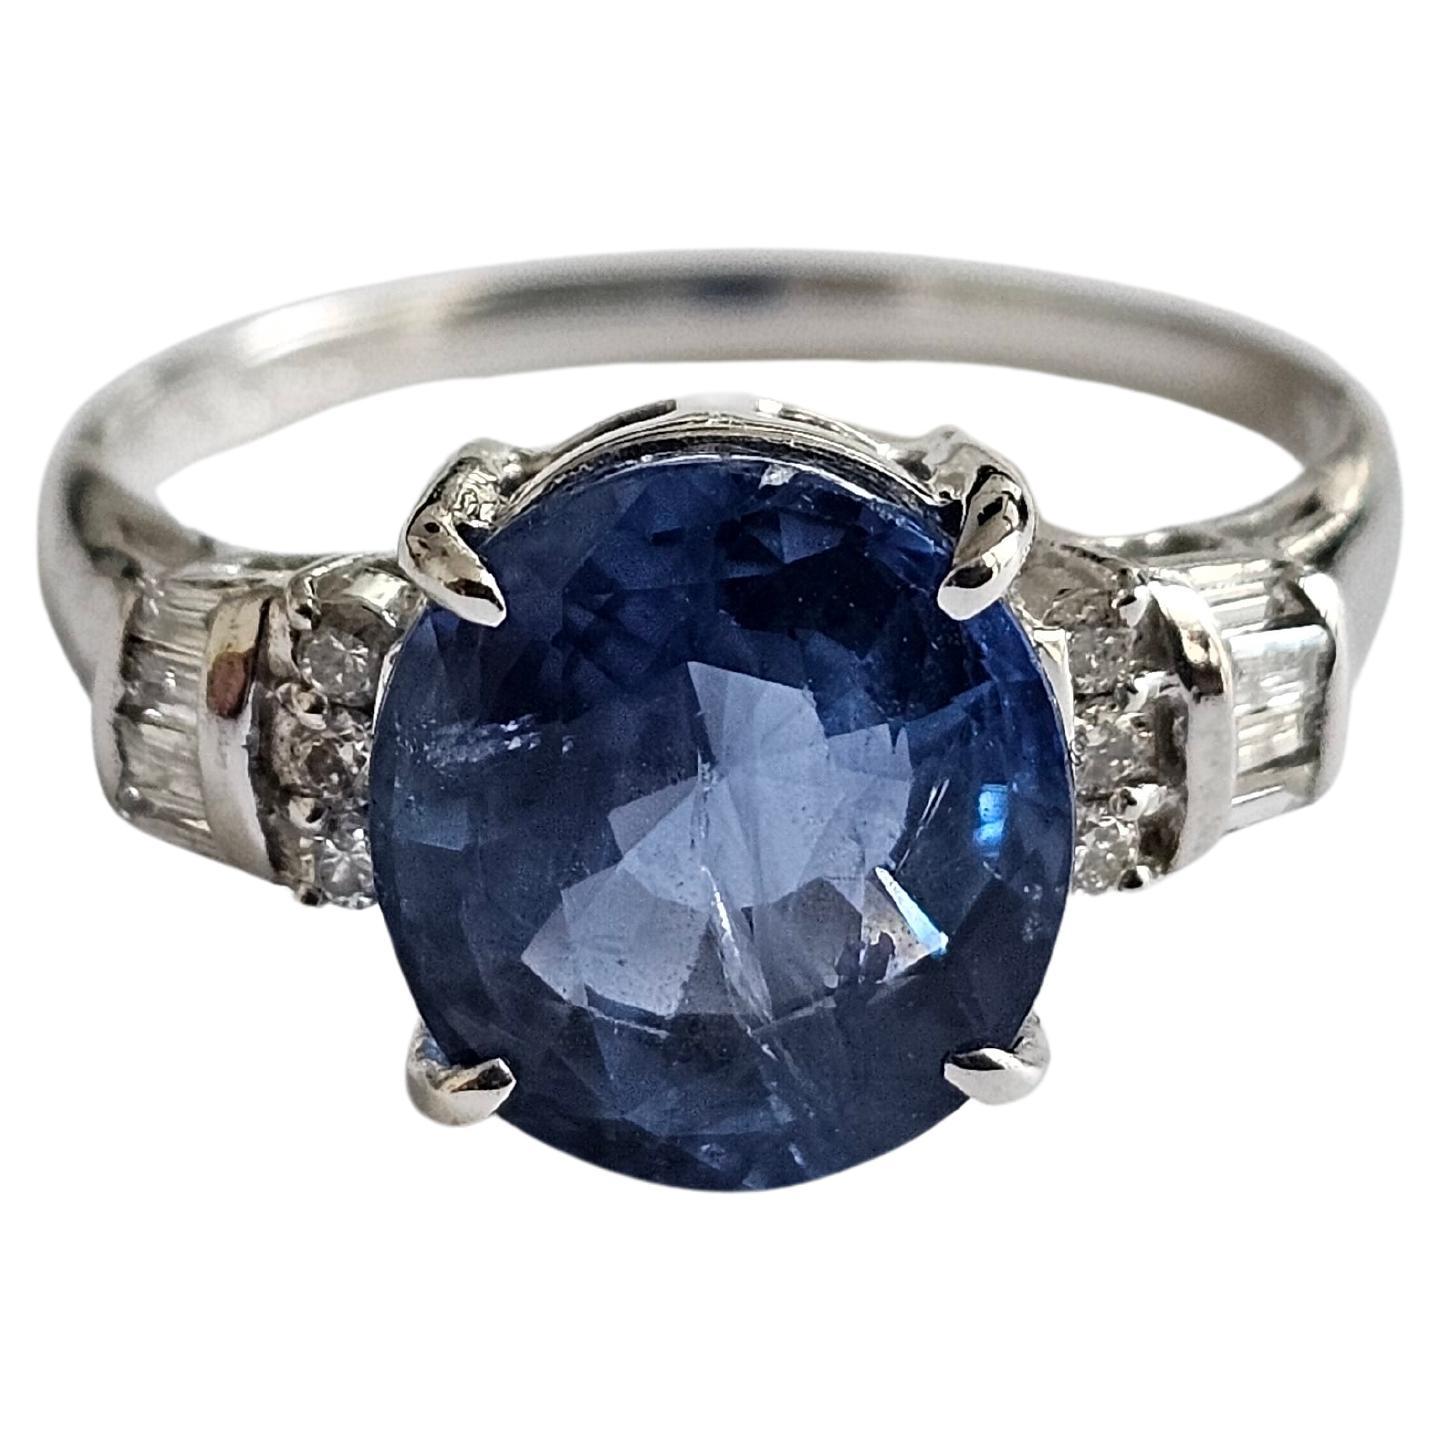 Made in Japan - Ceylon Blue Sapphire (4.526 cts.) Ring w 18K WH Gold, Diamonds For Sale